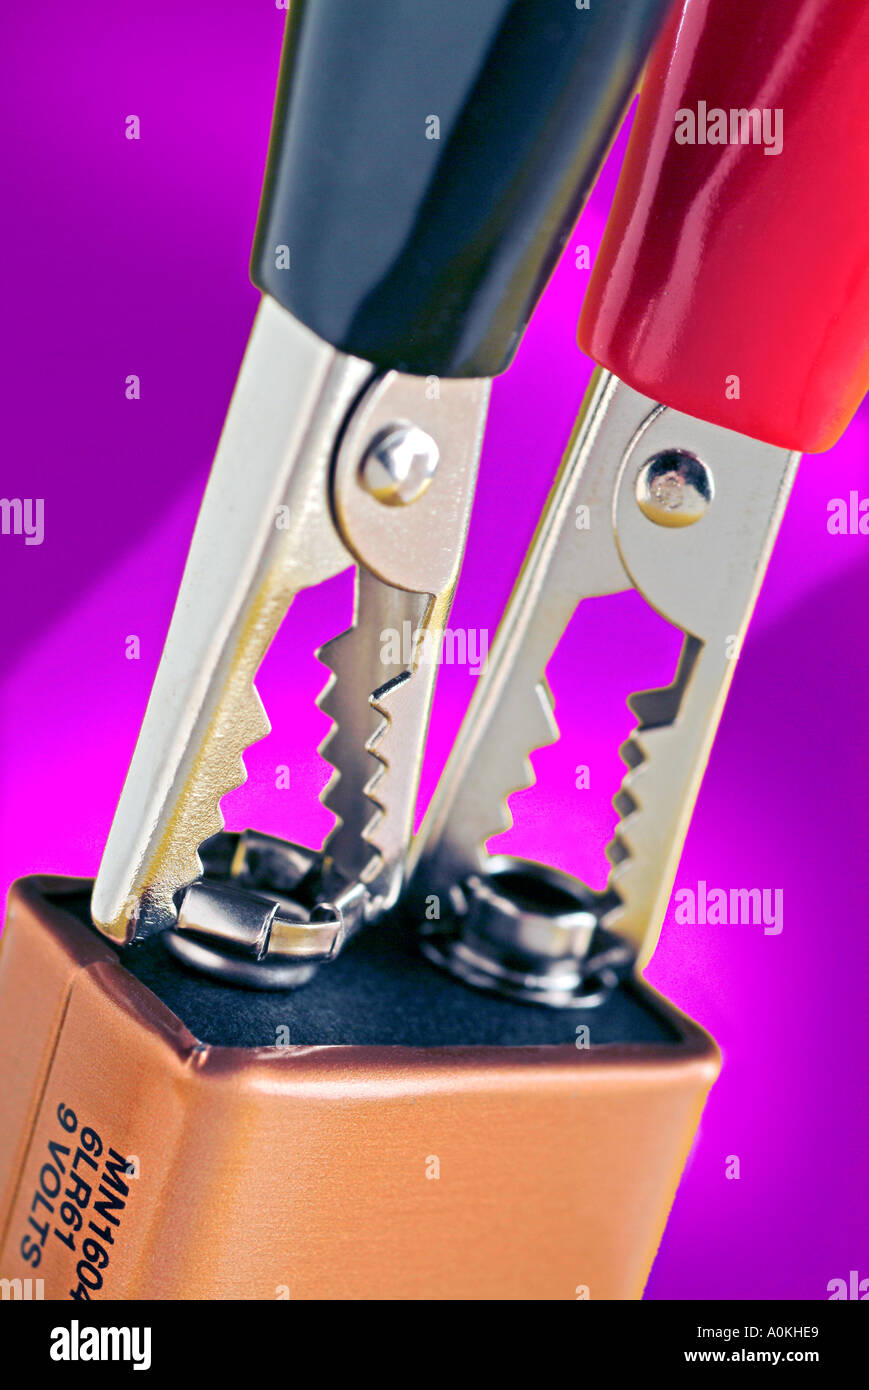 9 volt battery terminals with alligator clips Stock Photo - Alamy